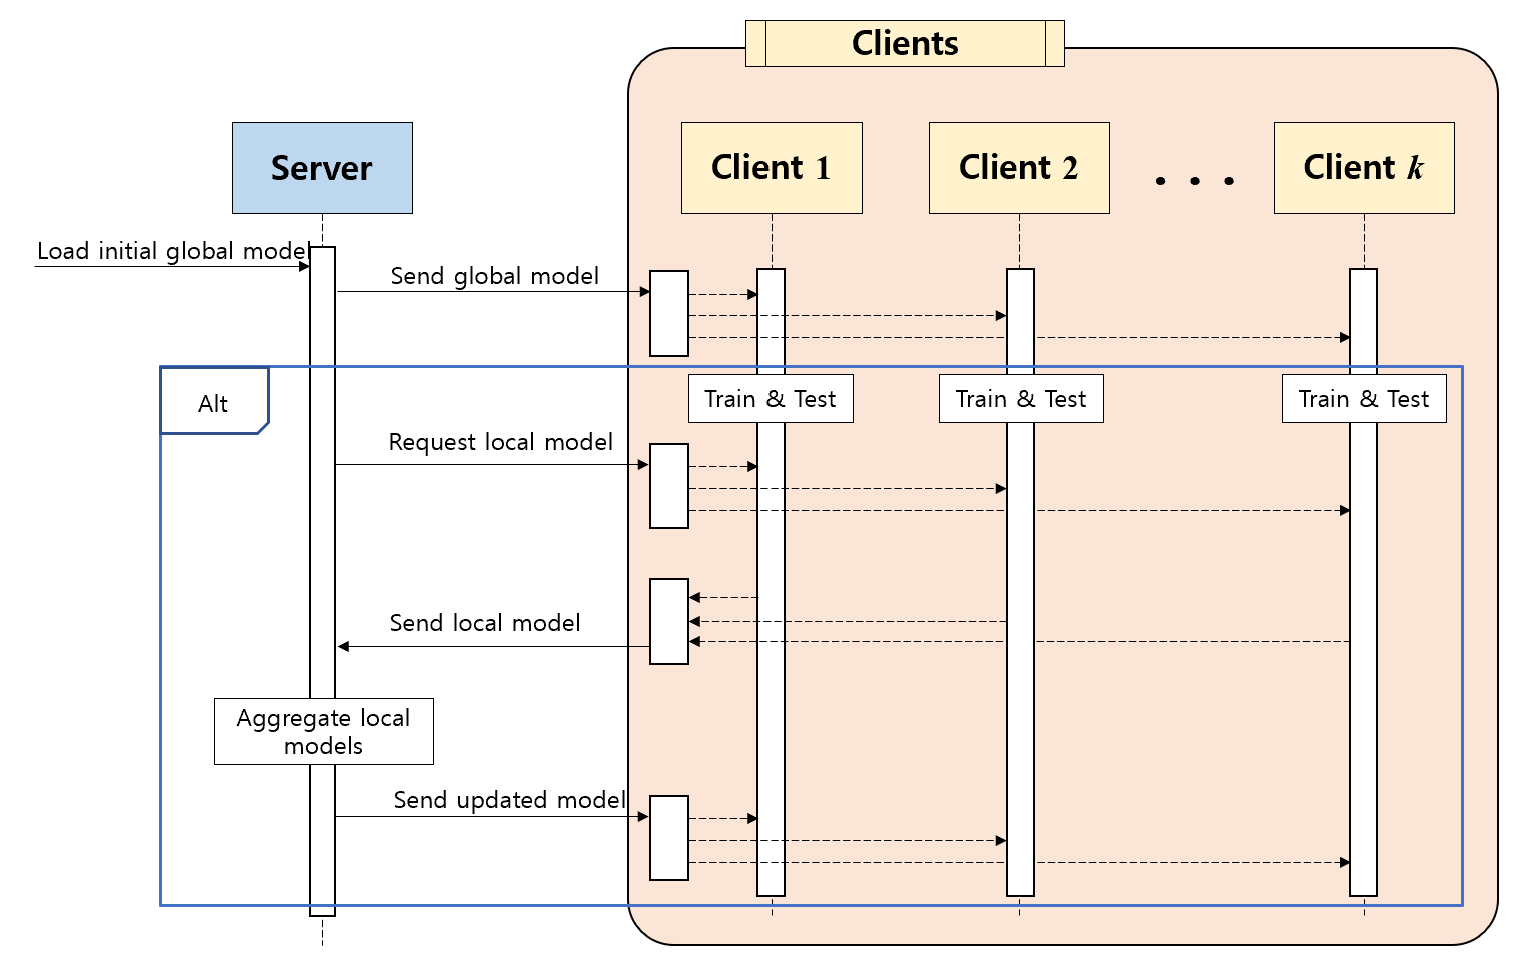 federated learning process involving a server and multiple client nodes